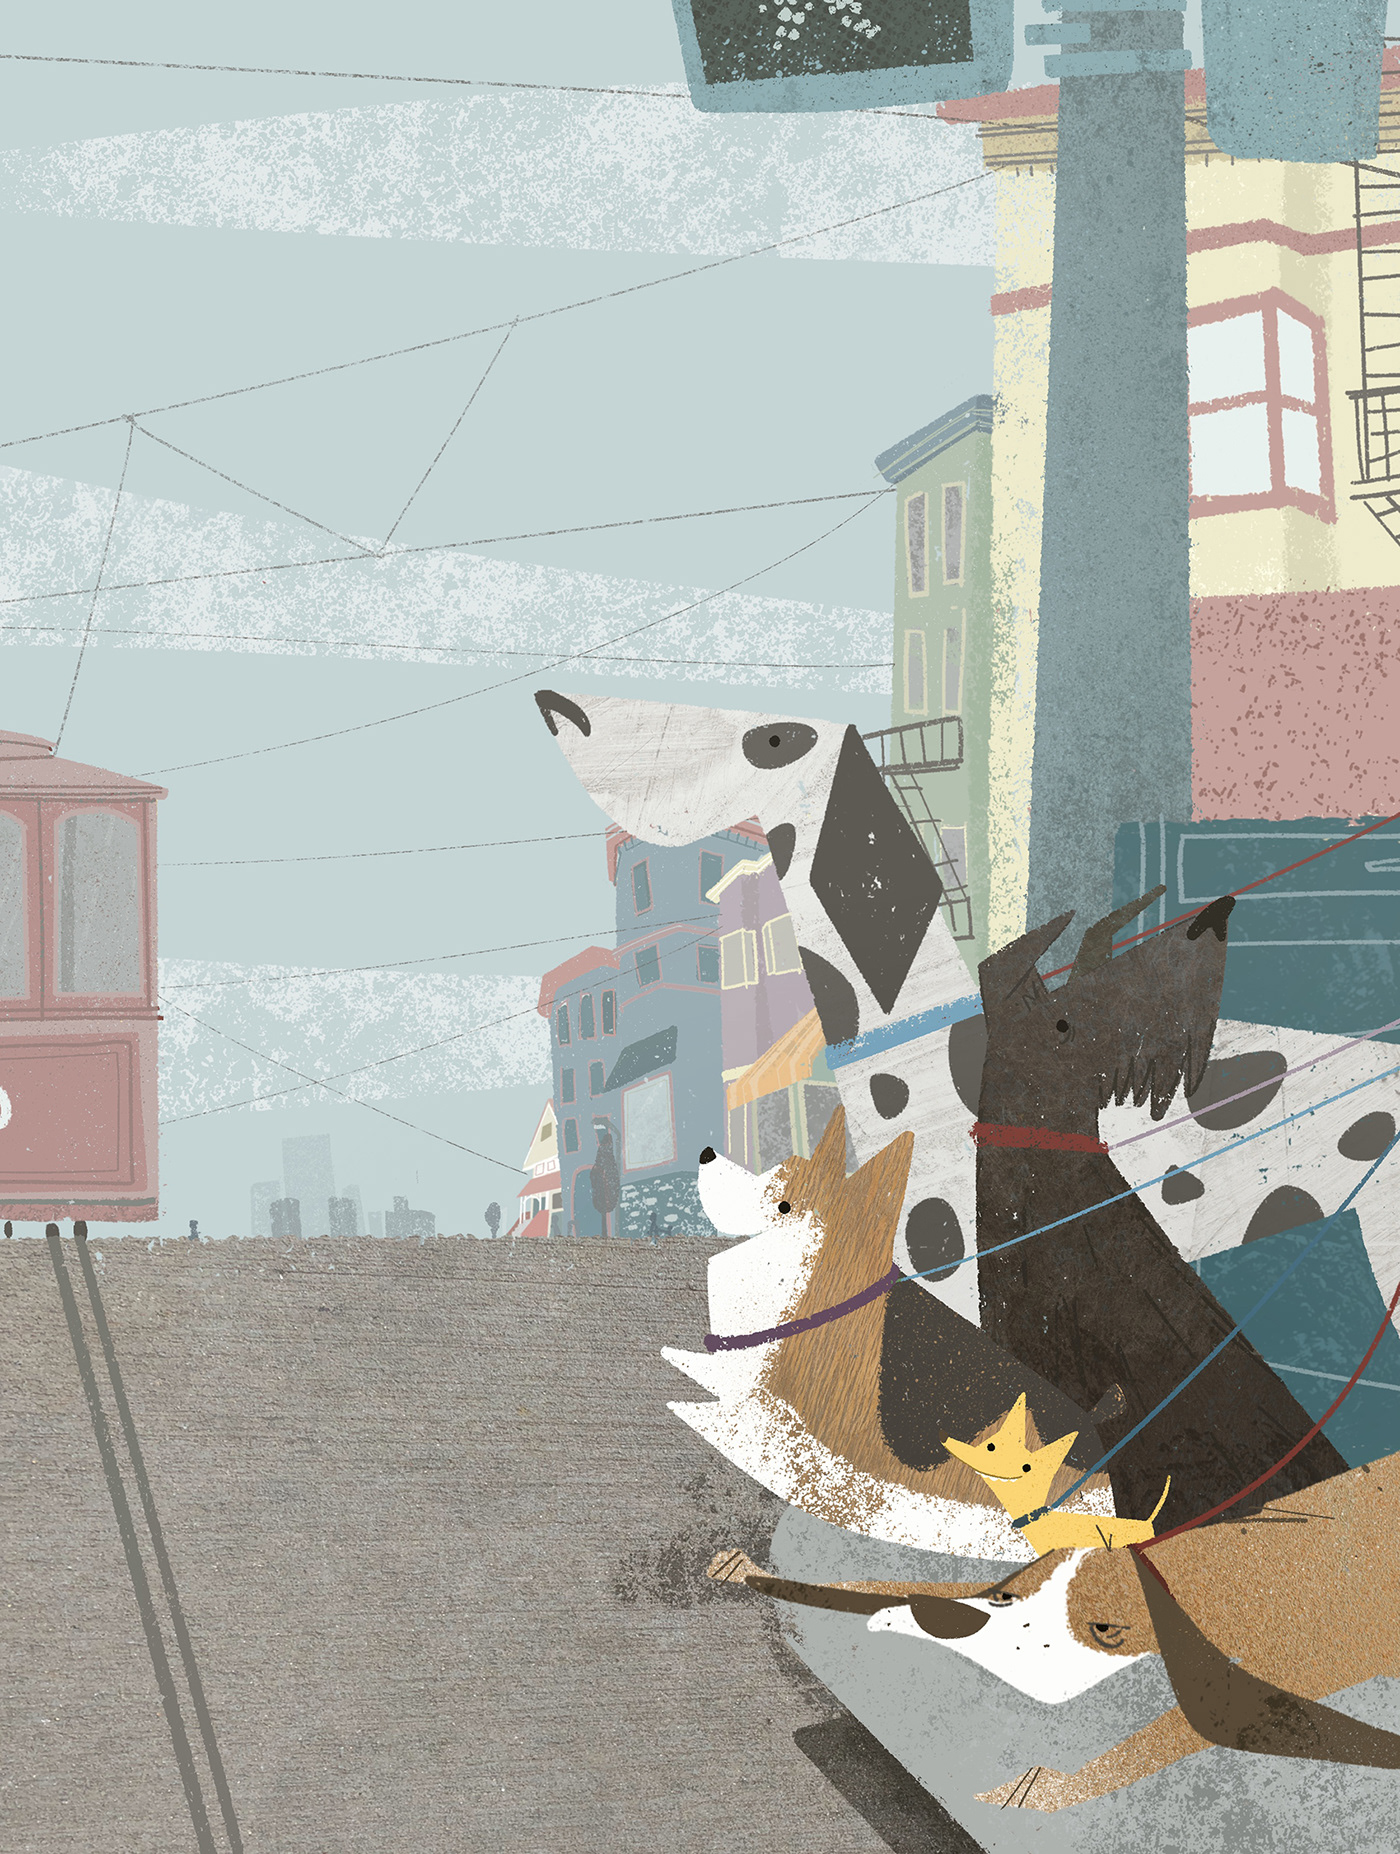 san francisco children's book Picture book dogs dog book illustration children's book illustrator book story collage